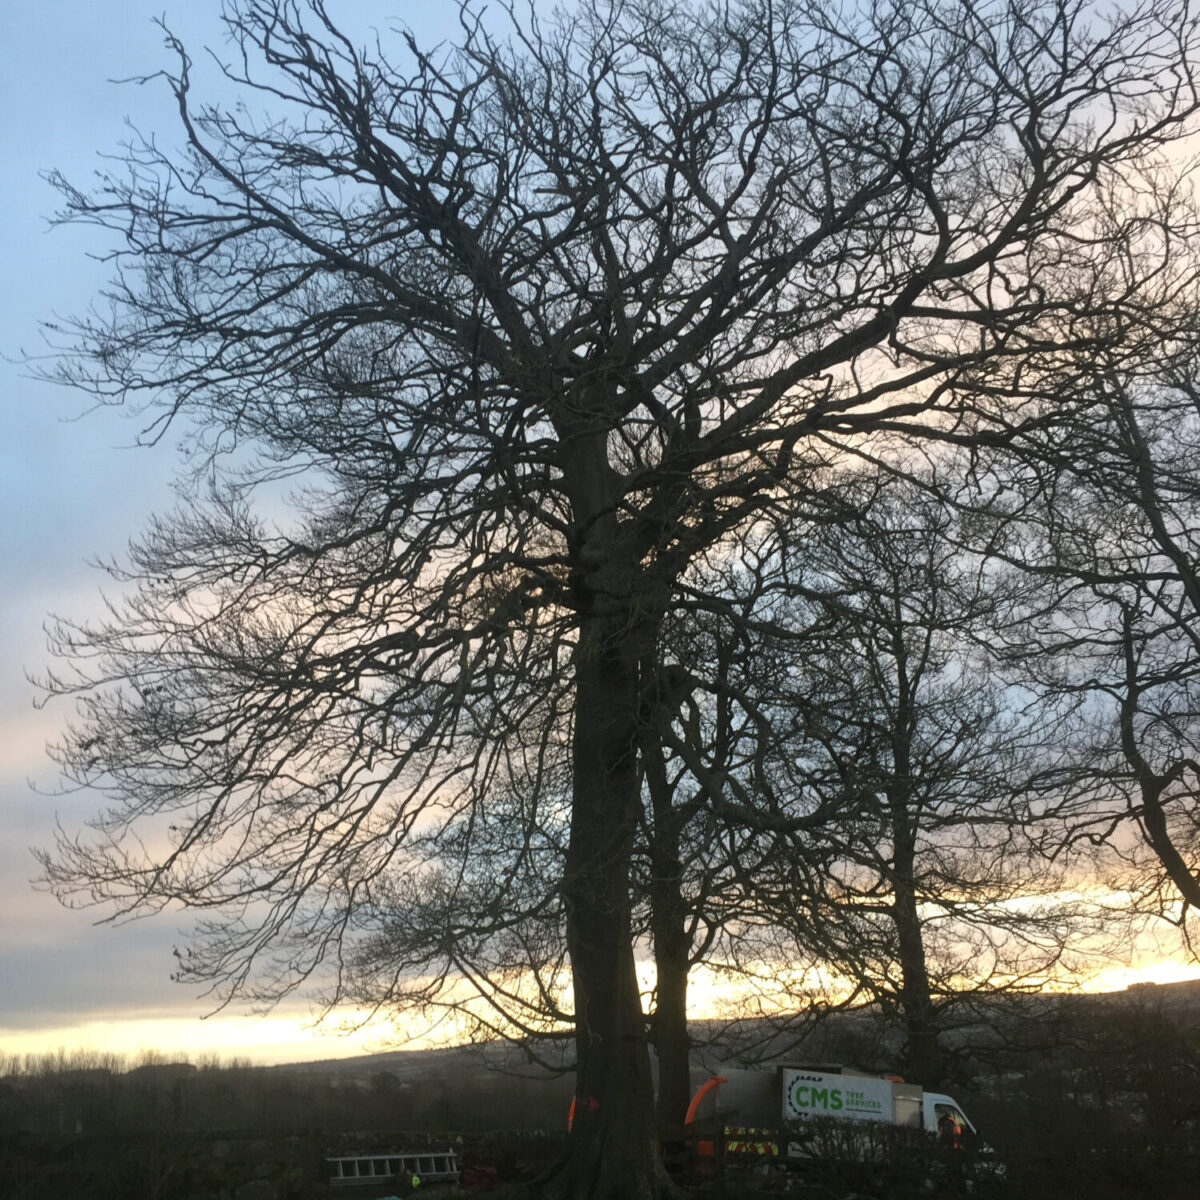 cms-tree-services-commerical-large-beech-trees-removed-grindleton